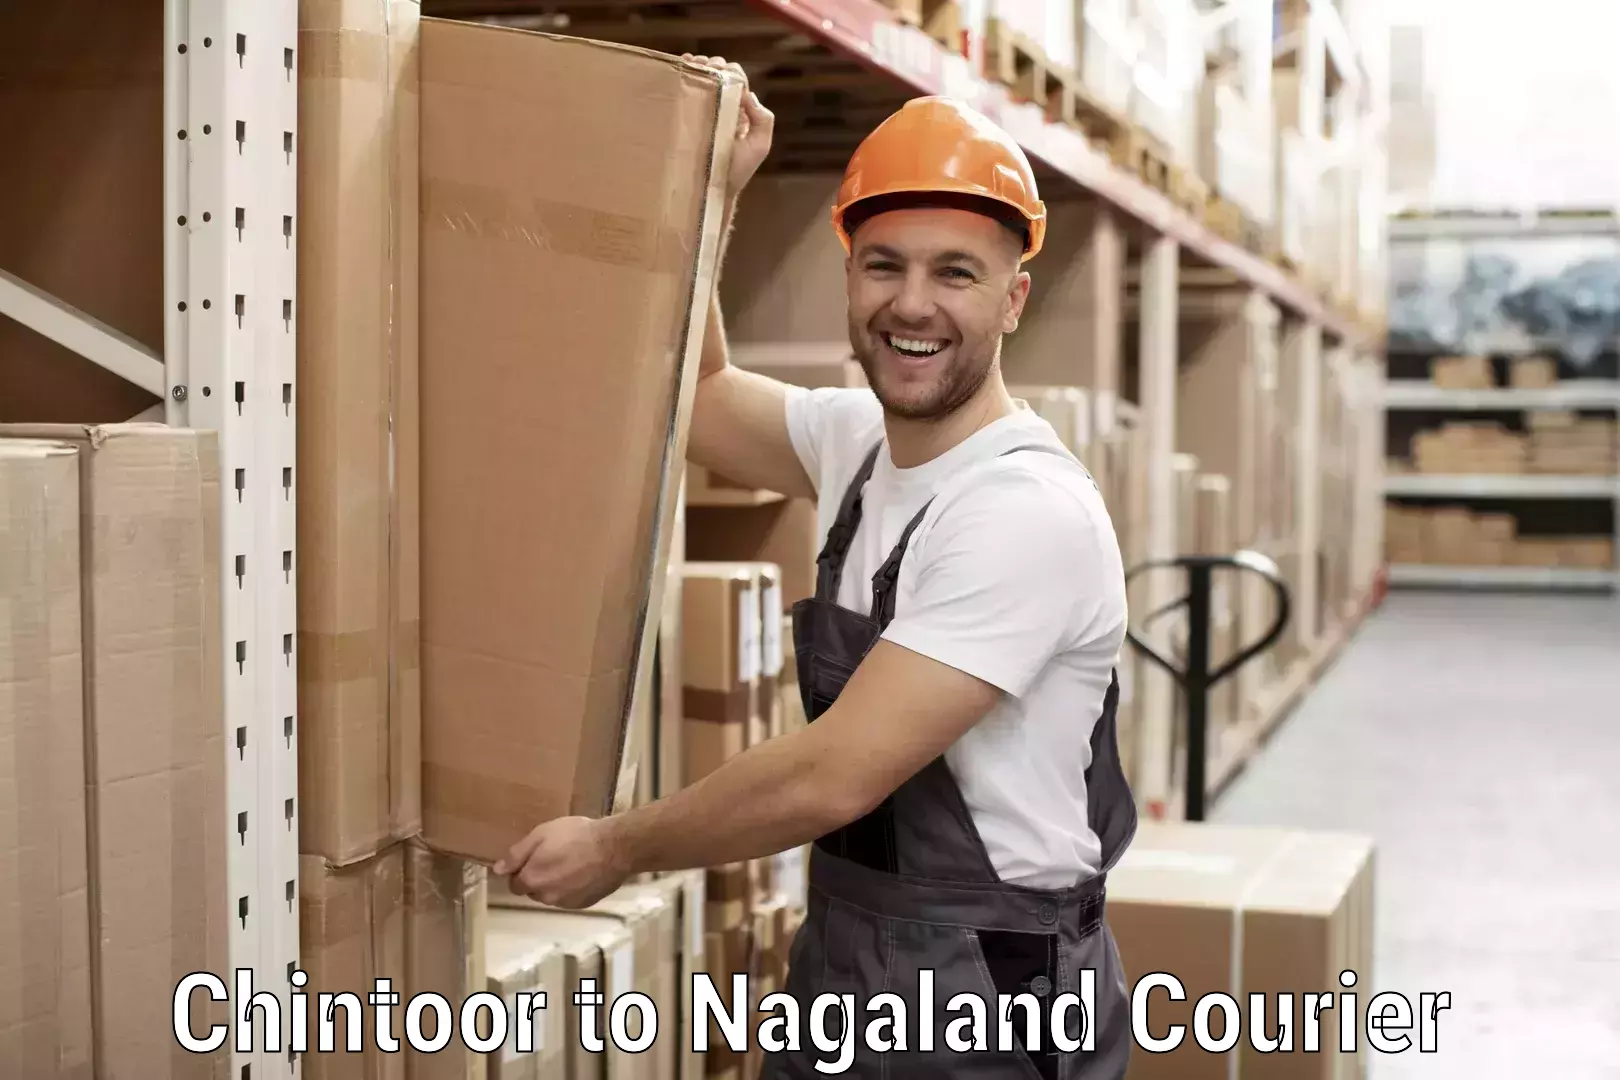 End-to-end delivery Chintoor to Nagaland